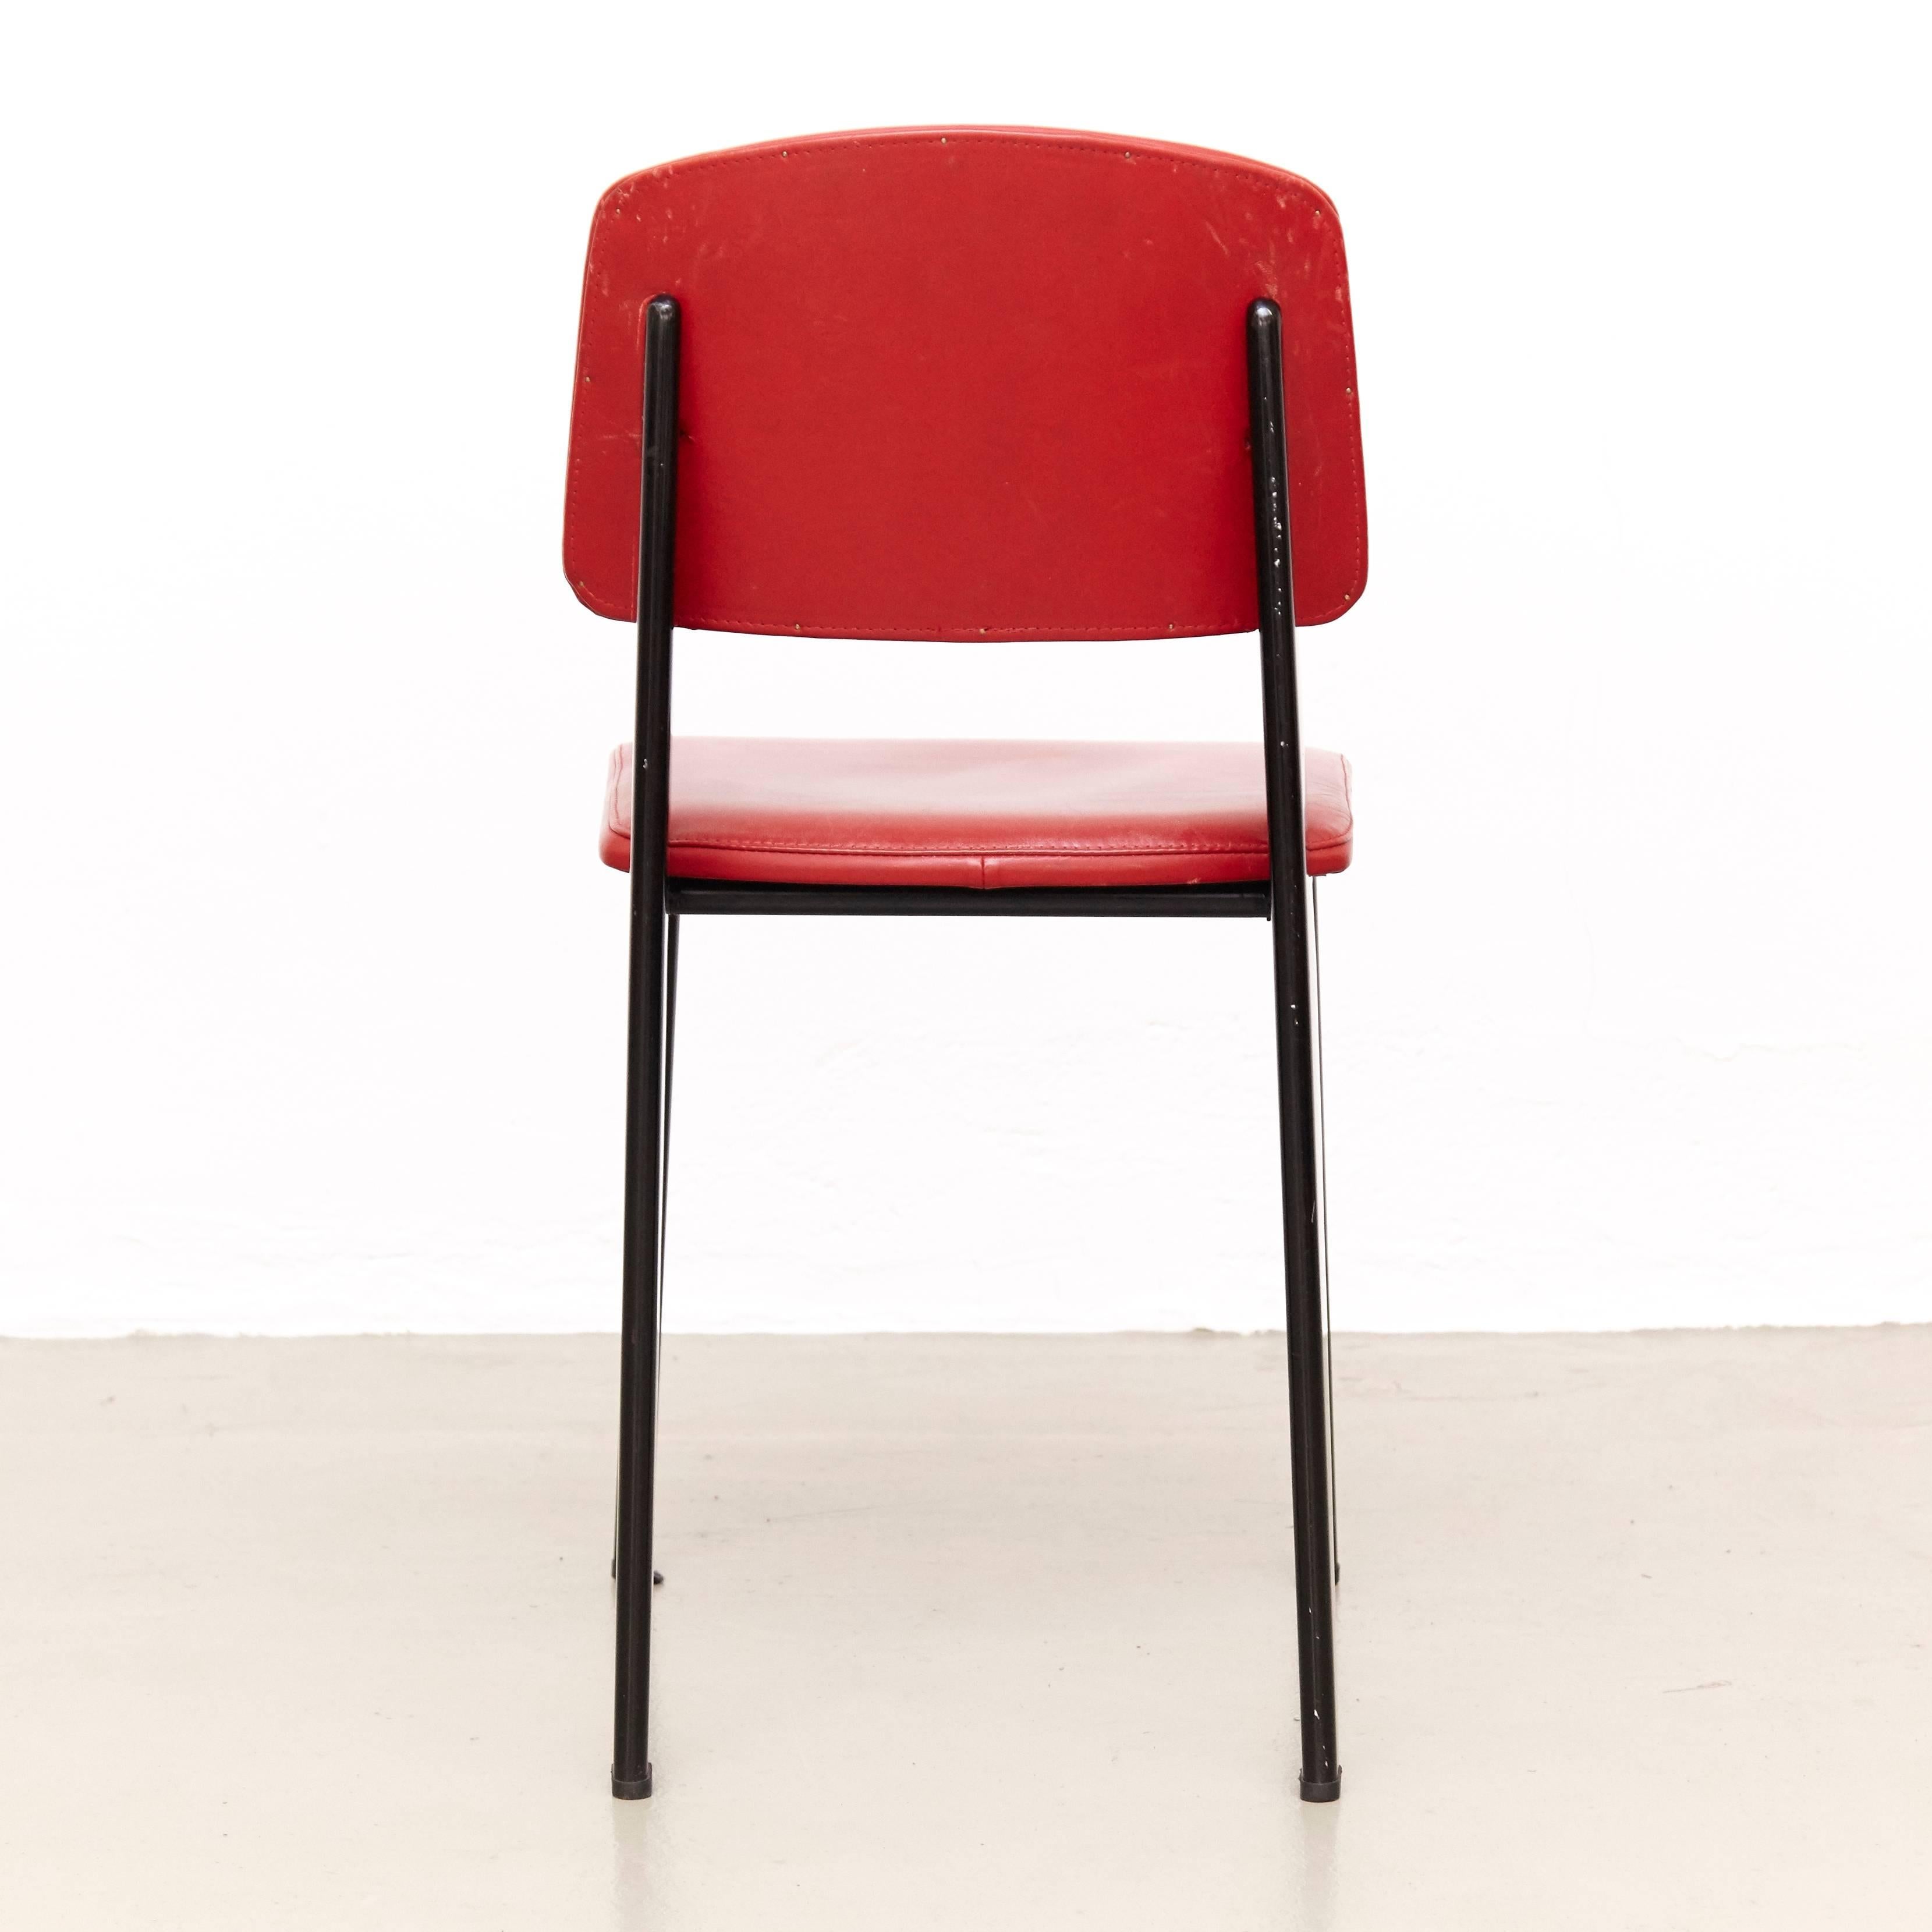 French Jean Prouvé Mid-Century Modern Red Upholstered Standard Chair, circa 1950